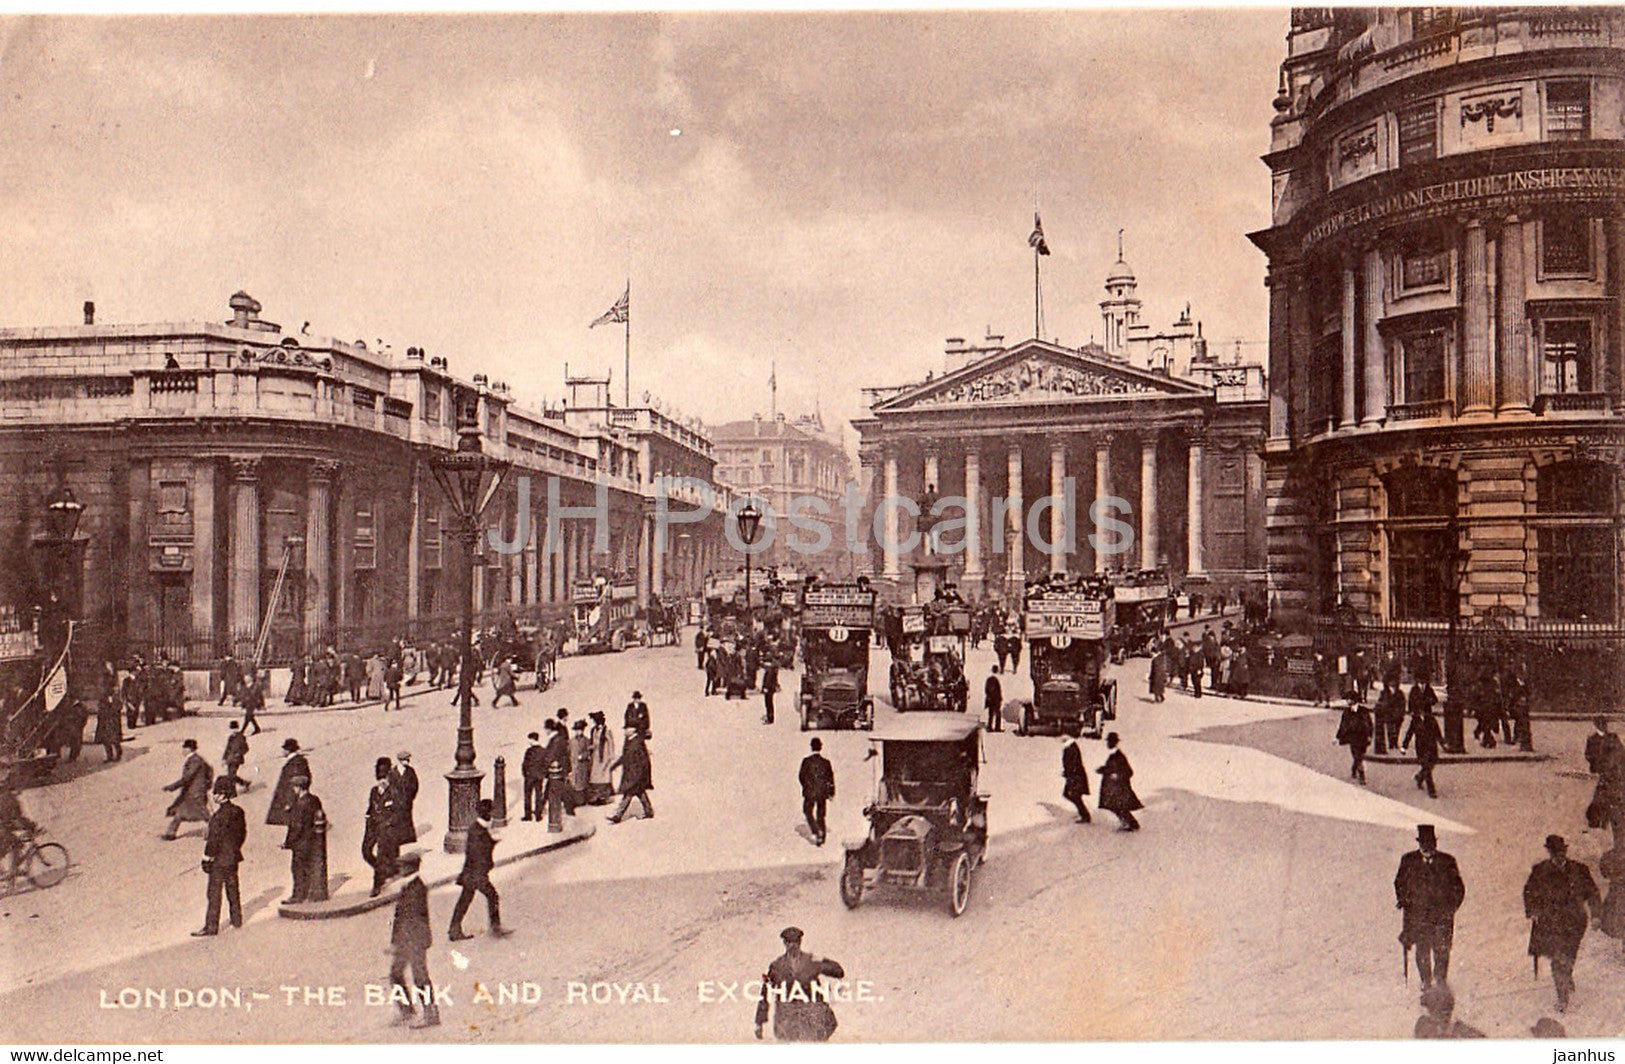 London - The Bank and Royal Exchange - car - bus - Muchmore - 7872 - old postcard - England - United Kingdom - used - JH Postcards